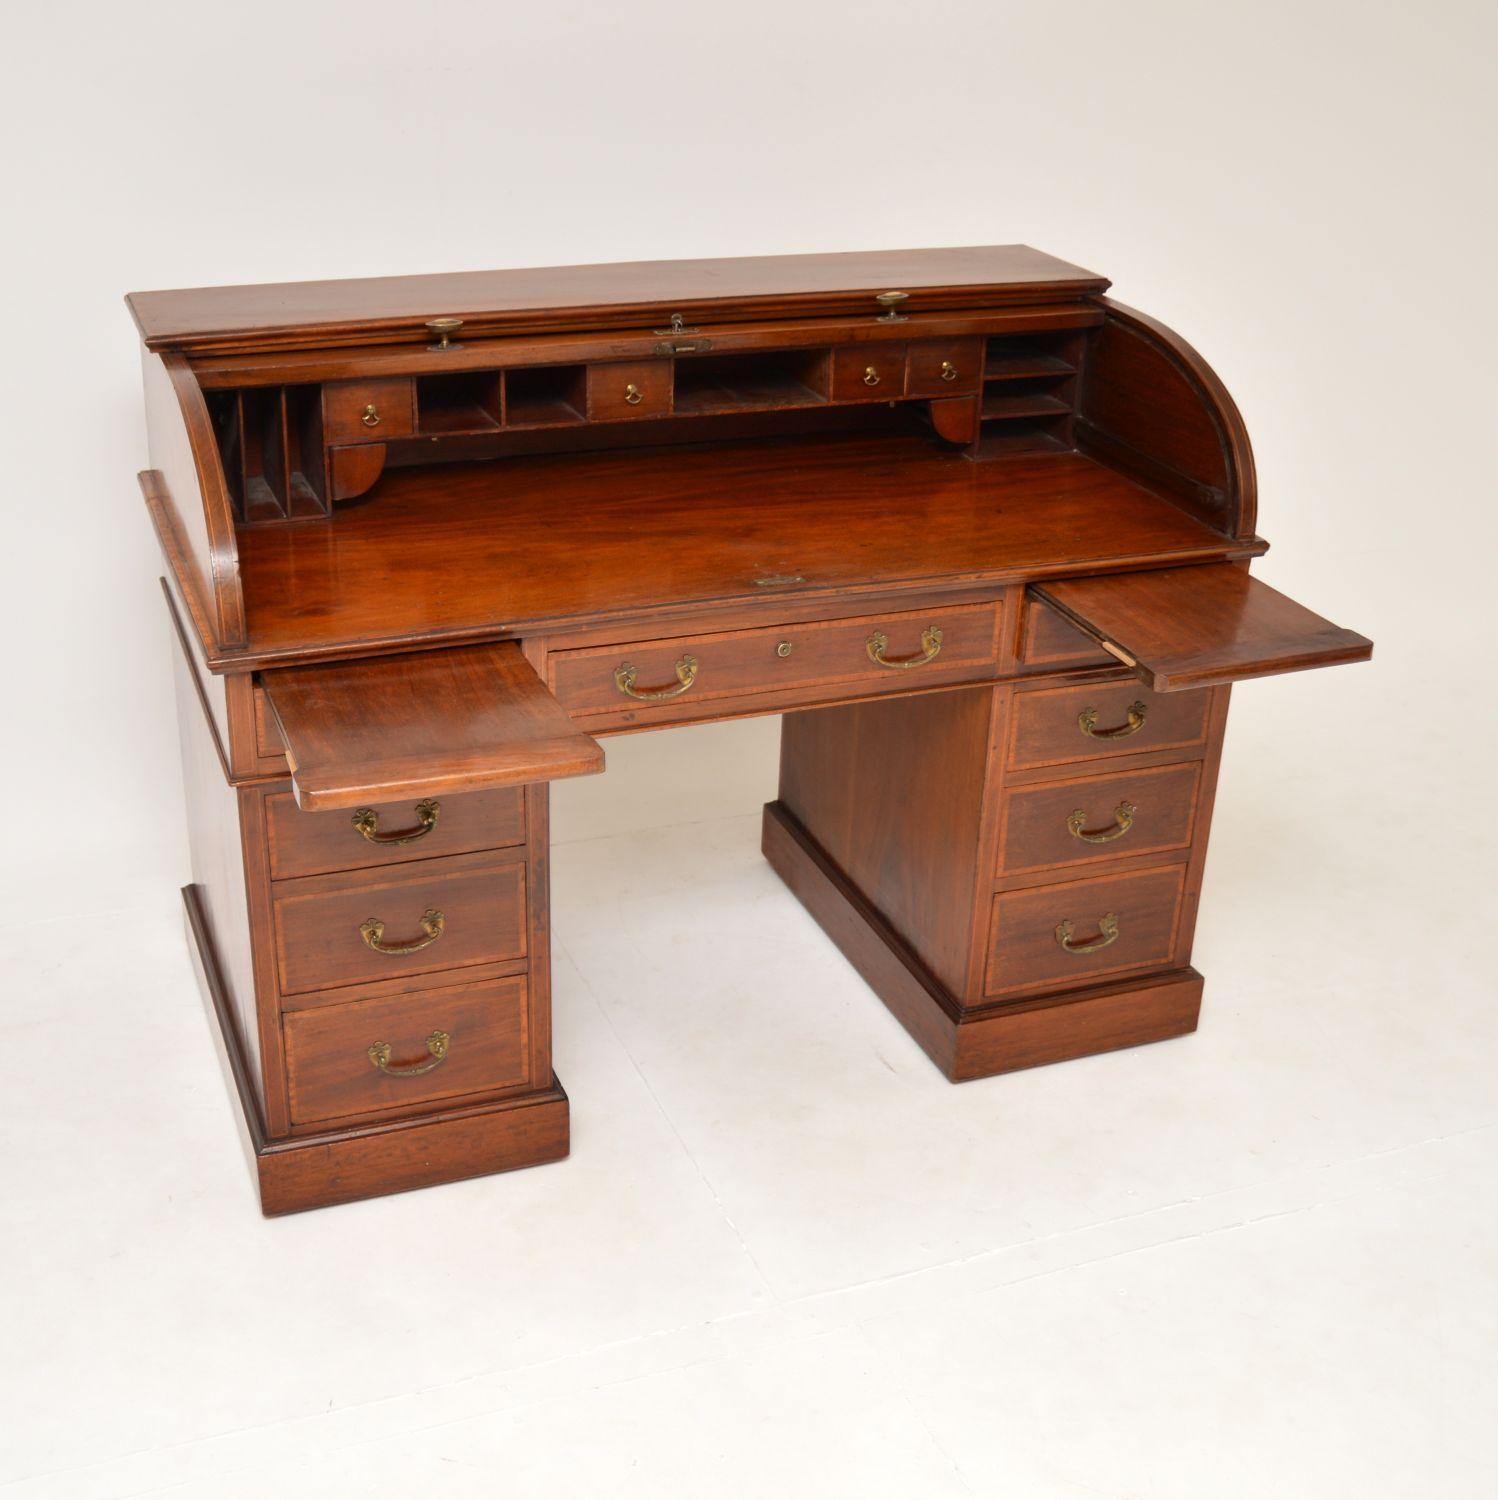 A magnificent antique roll top desk, with satinwood inlays. This was made in England by Waring and Gillows, it dates from around the 1890-1910 period.

It is of absolutely amazing quality, this is like the Rolls Royce of desks, with many fine